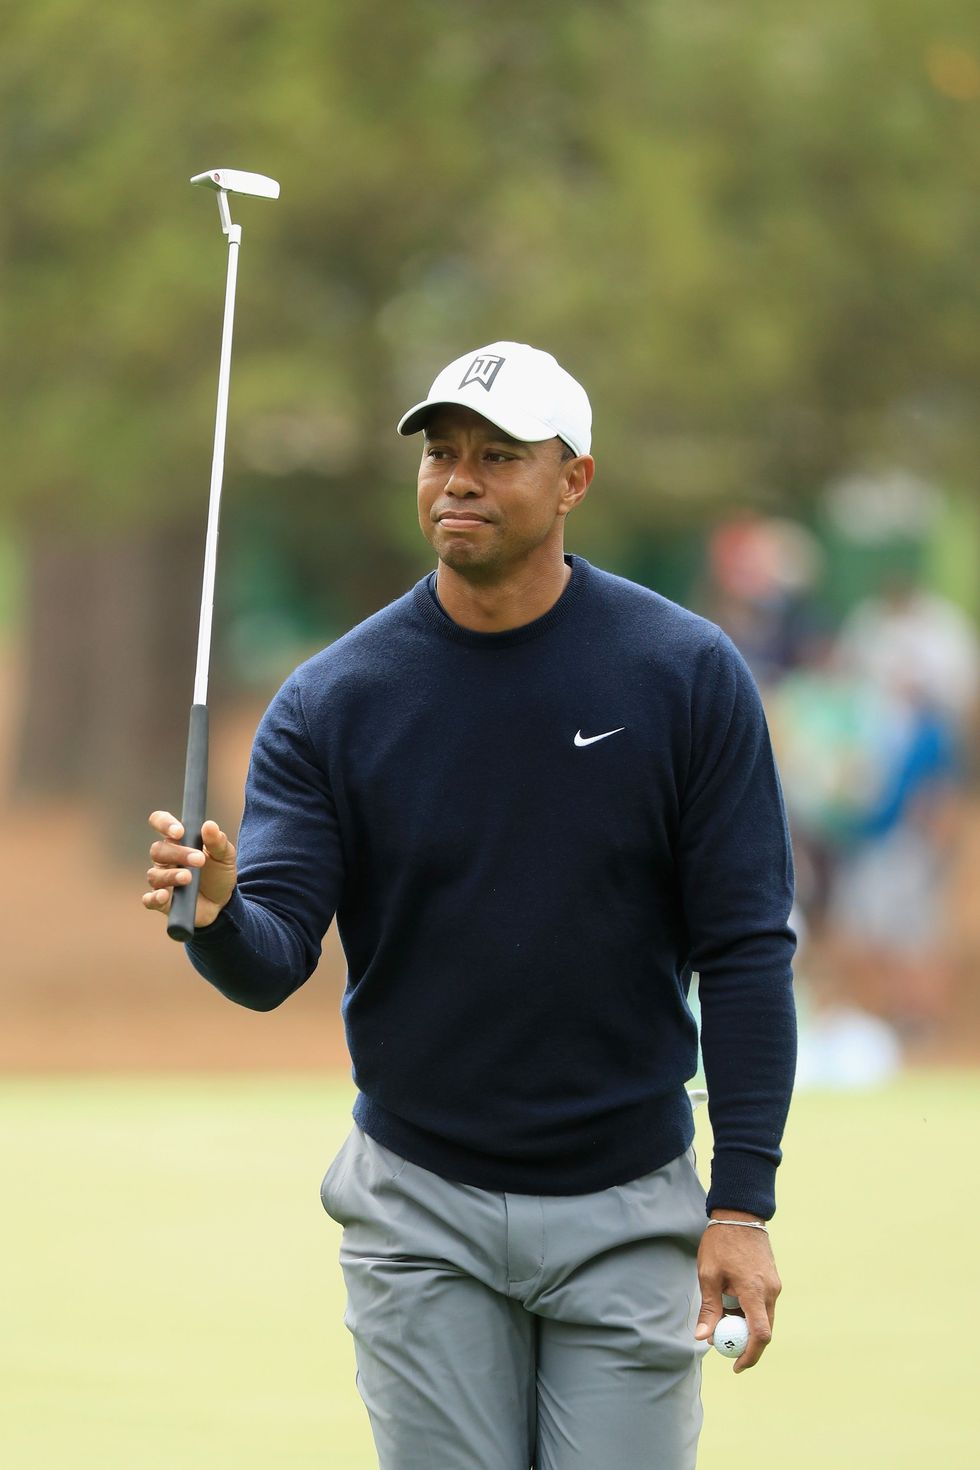 Tiger Woods is far from done, and a win may be coming soon